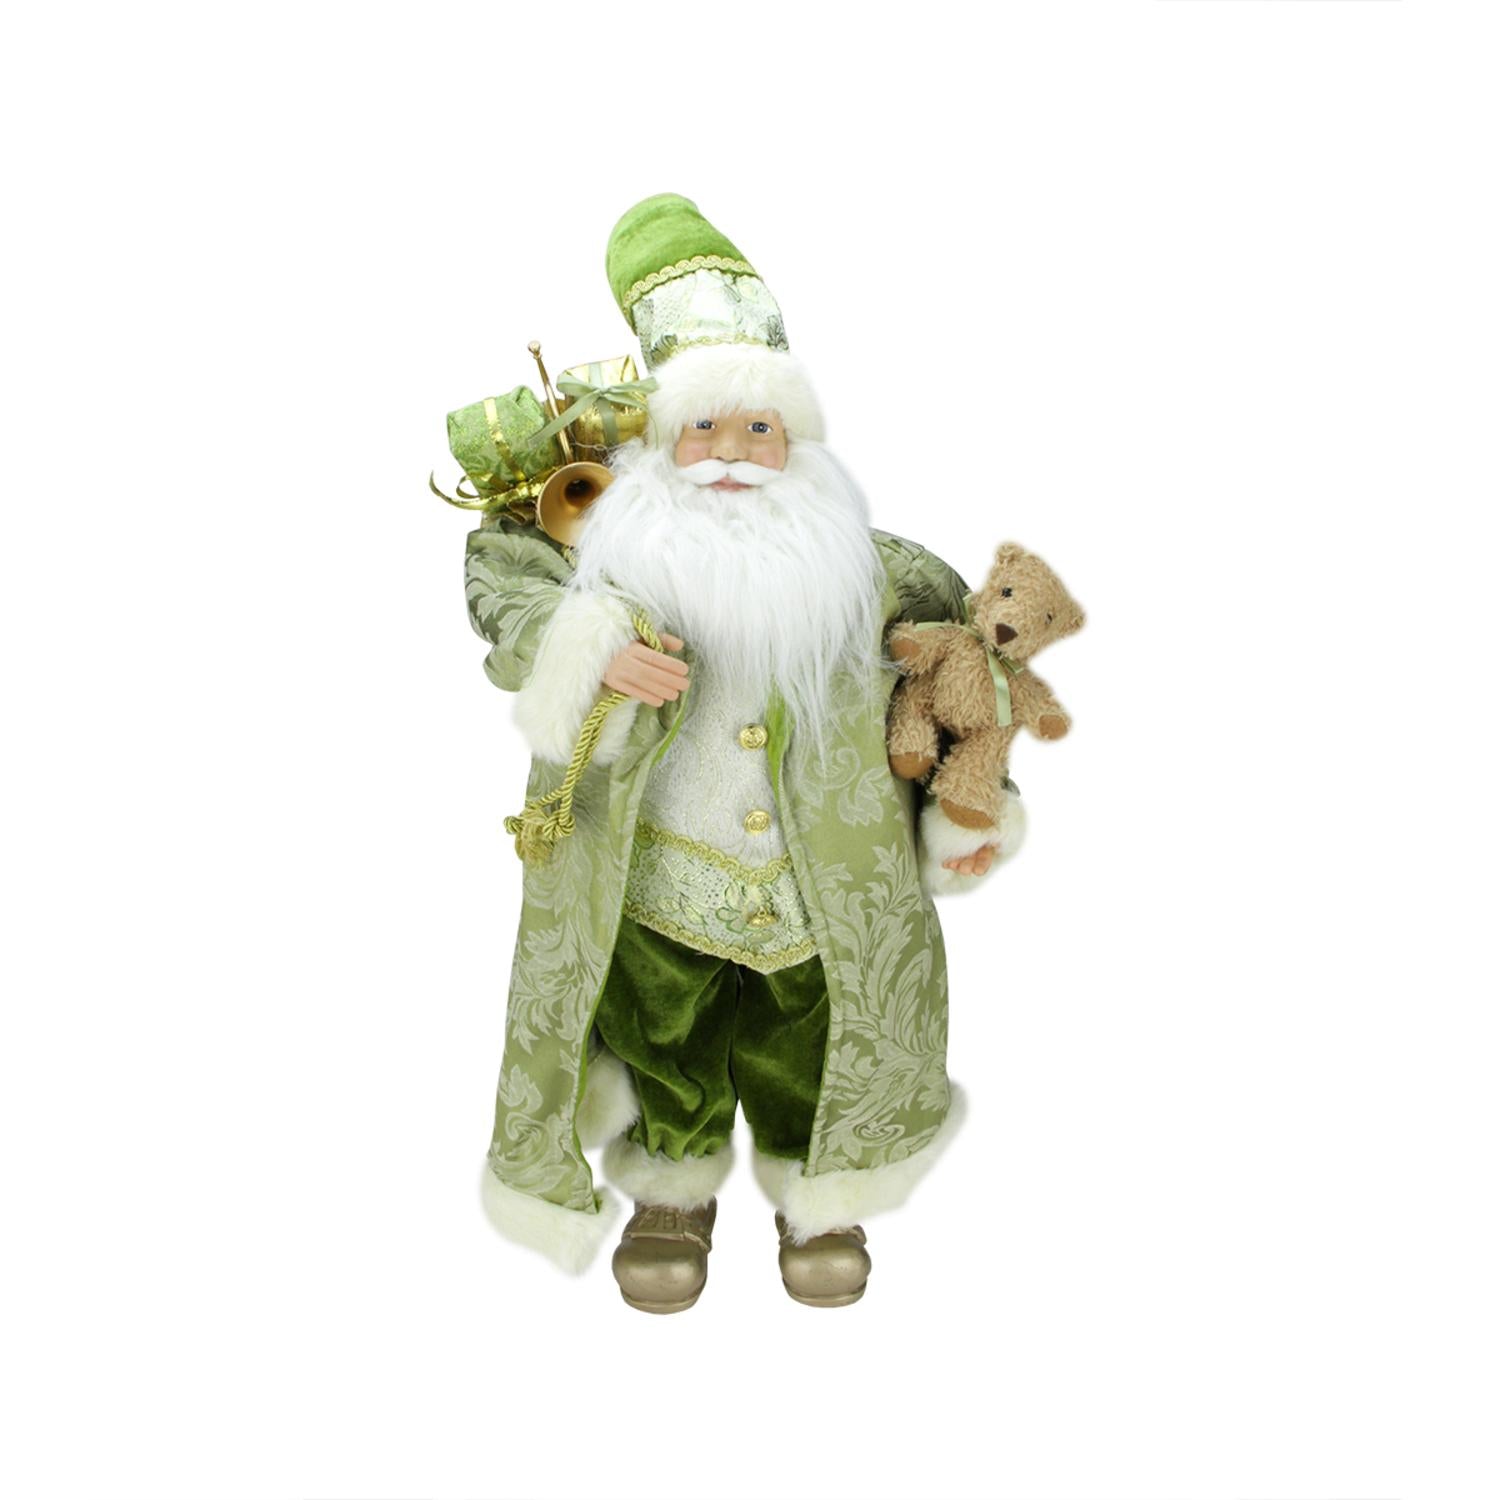 24" St. Patrick's Irish Standing Santa Claus Christmas Figure with Teddy Bear and Gift Bag